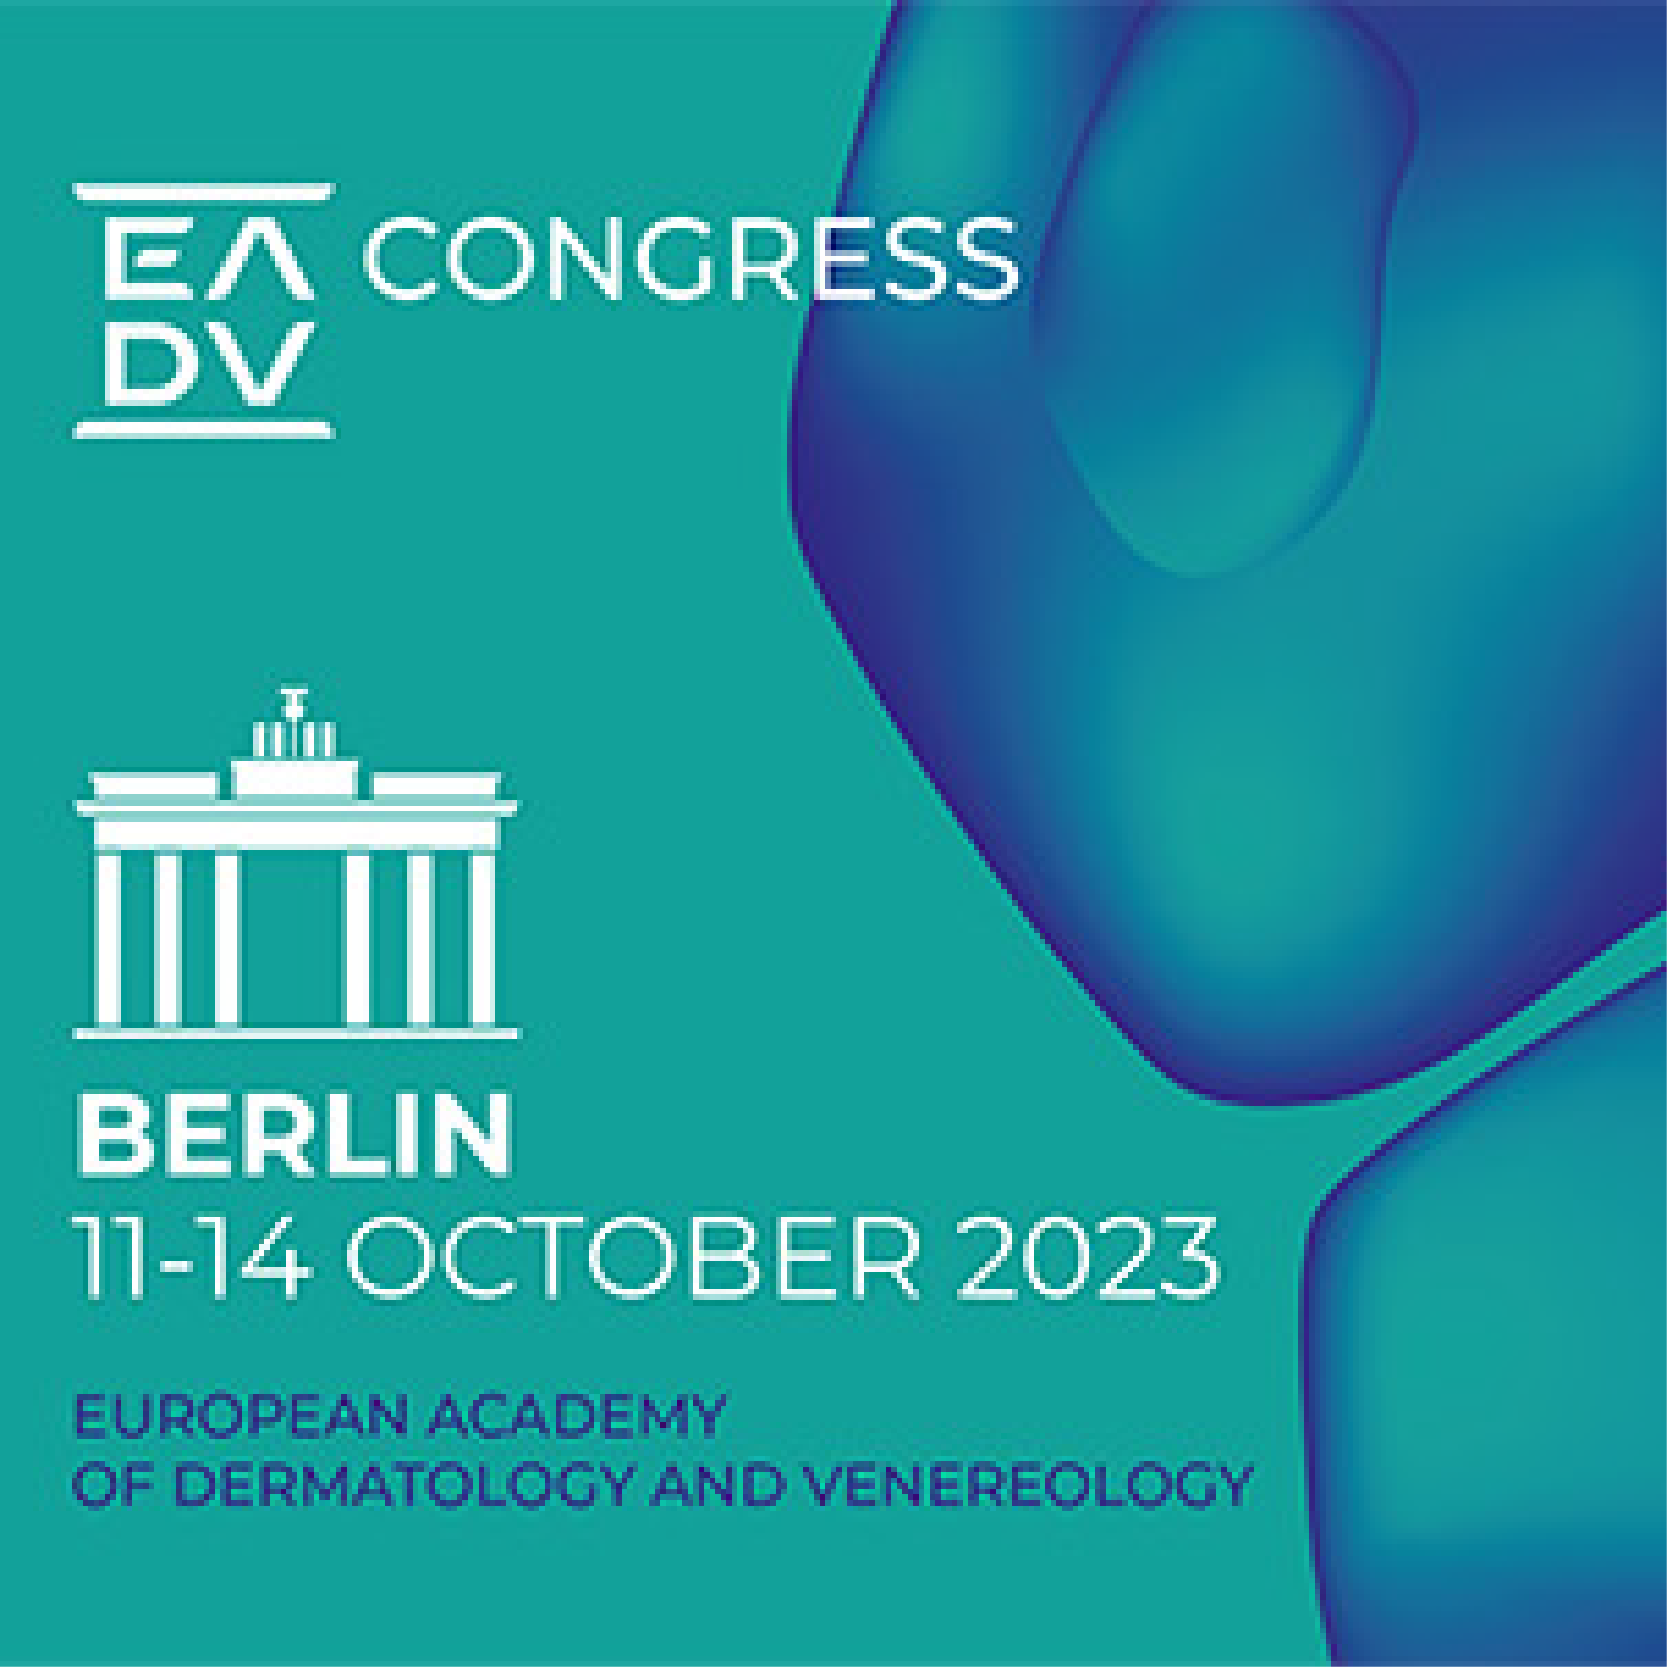 32nd Congress of the European Academy of Dermatology and Venereology - EADV 2023